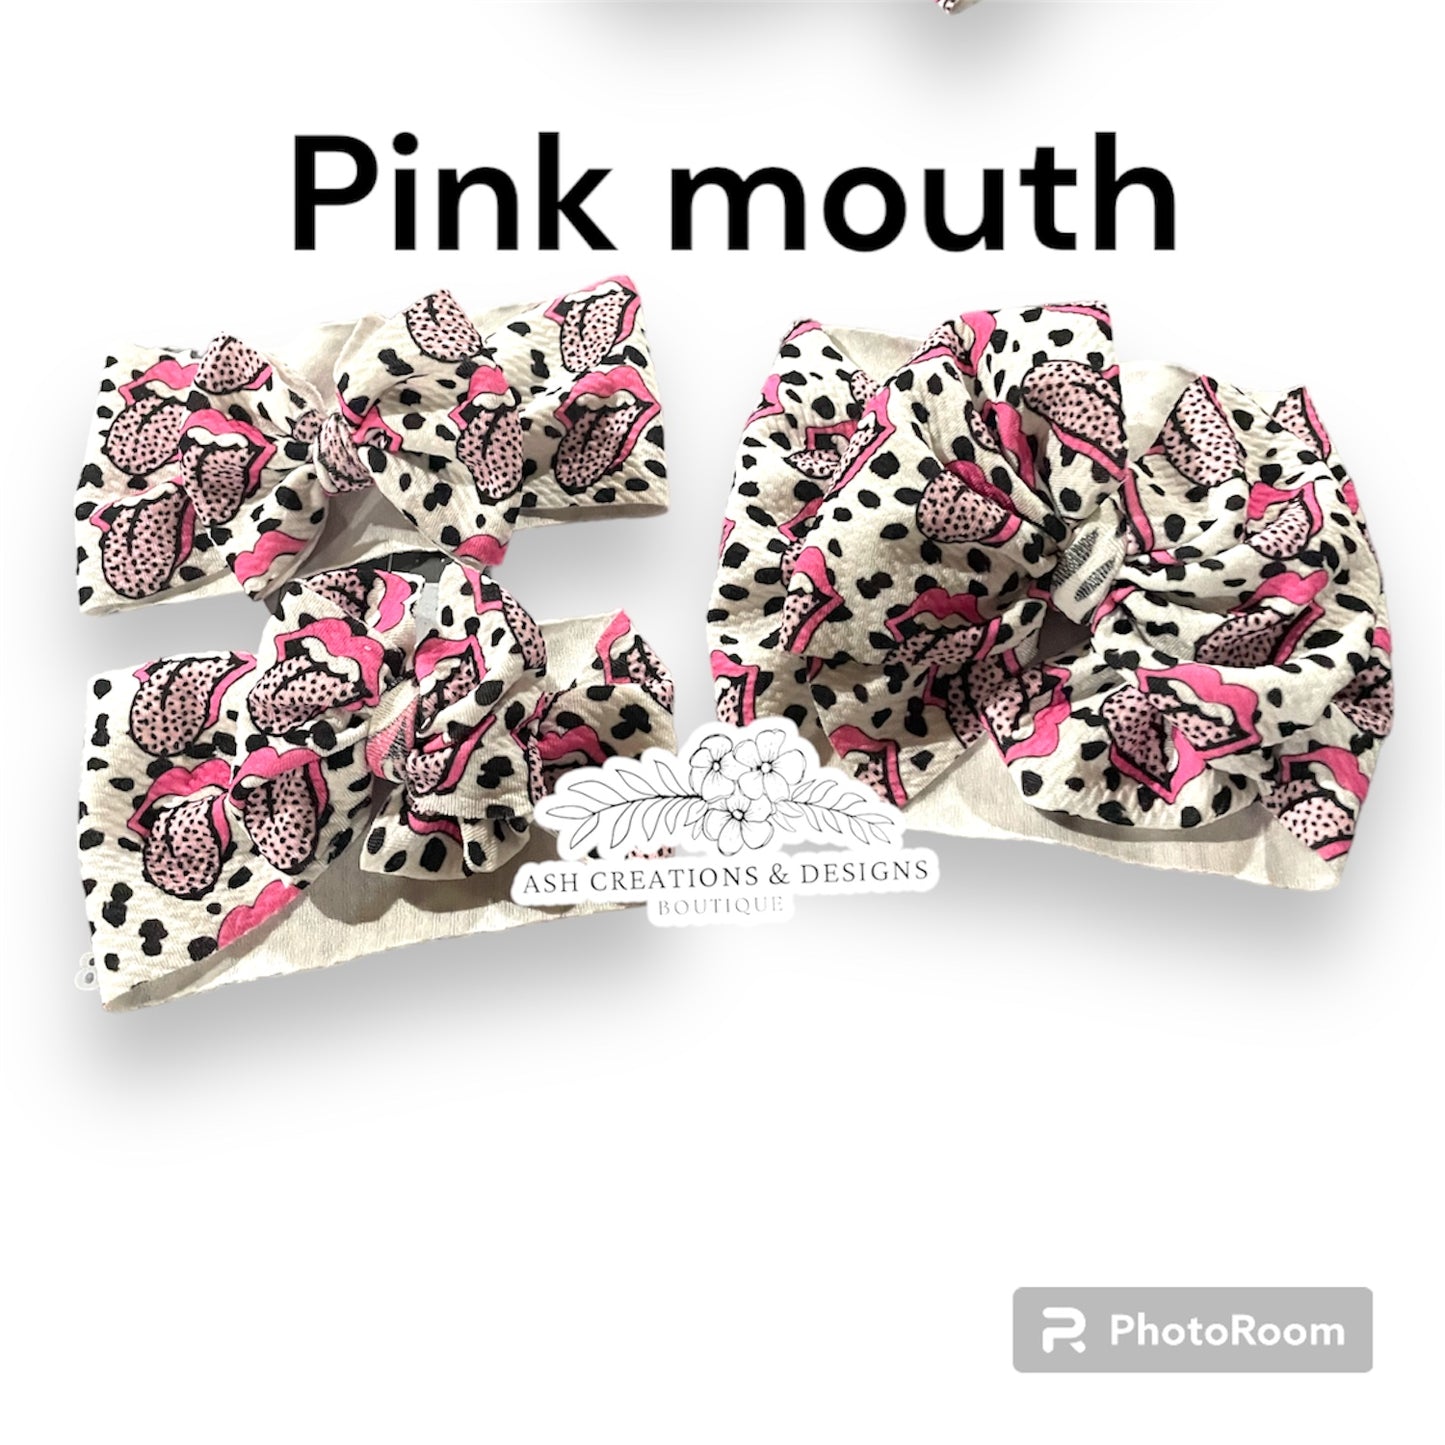 Pink mouth- Wraps